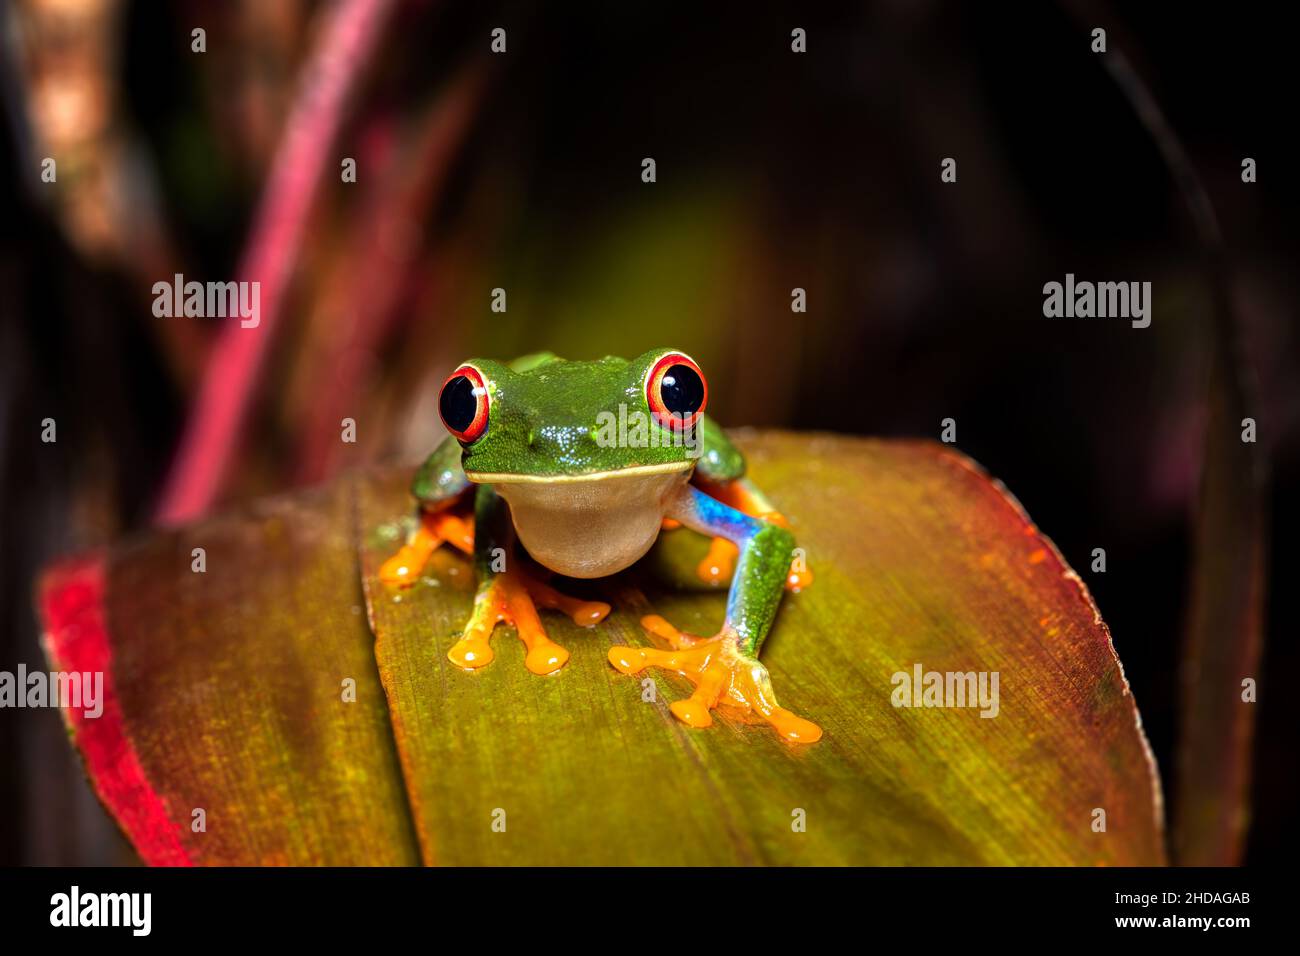 Red-eyed tree frog (Agalychnis callidryas), Beautiful iconic Green frog with red eyes sits on a red leaf in the tropics. Refugio de Vida Silvestre Can Stock Photo